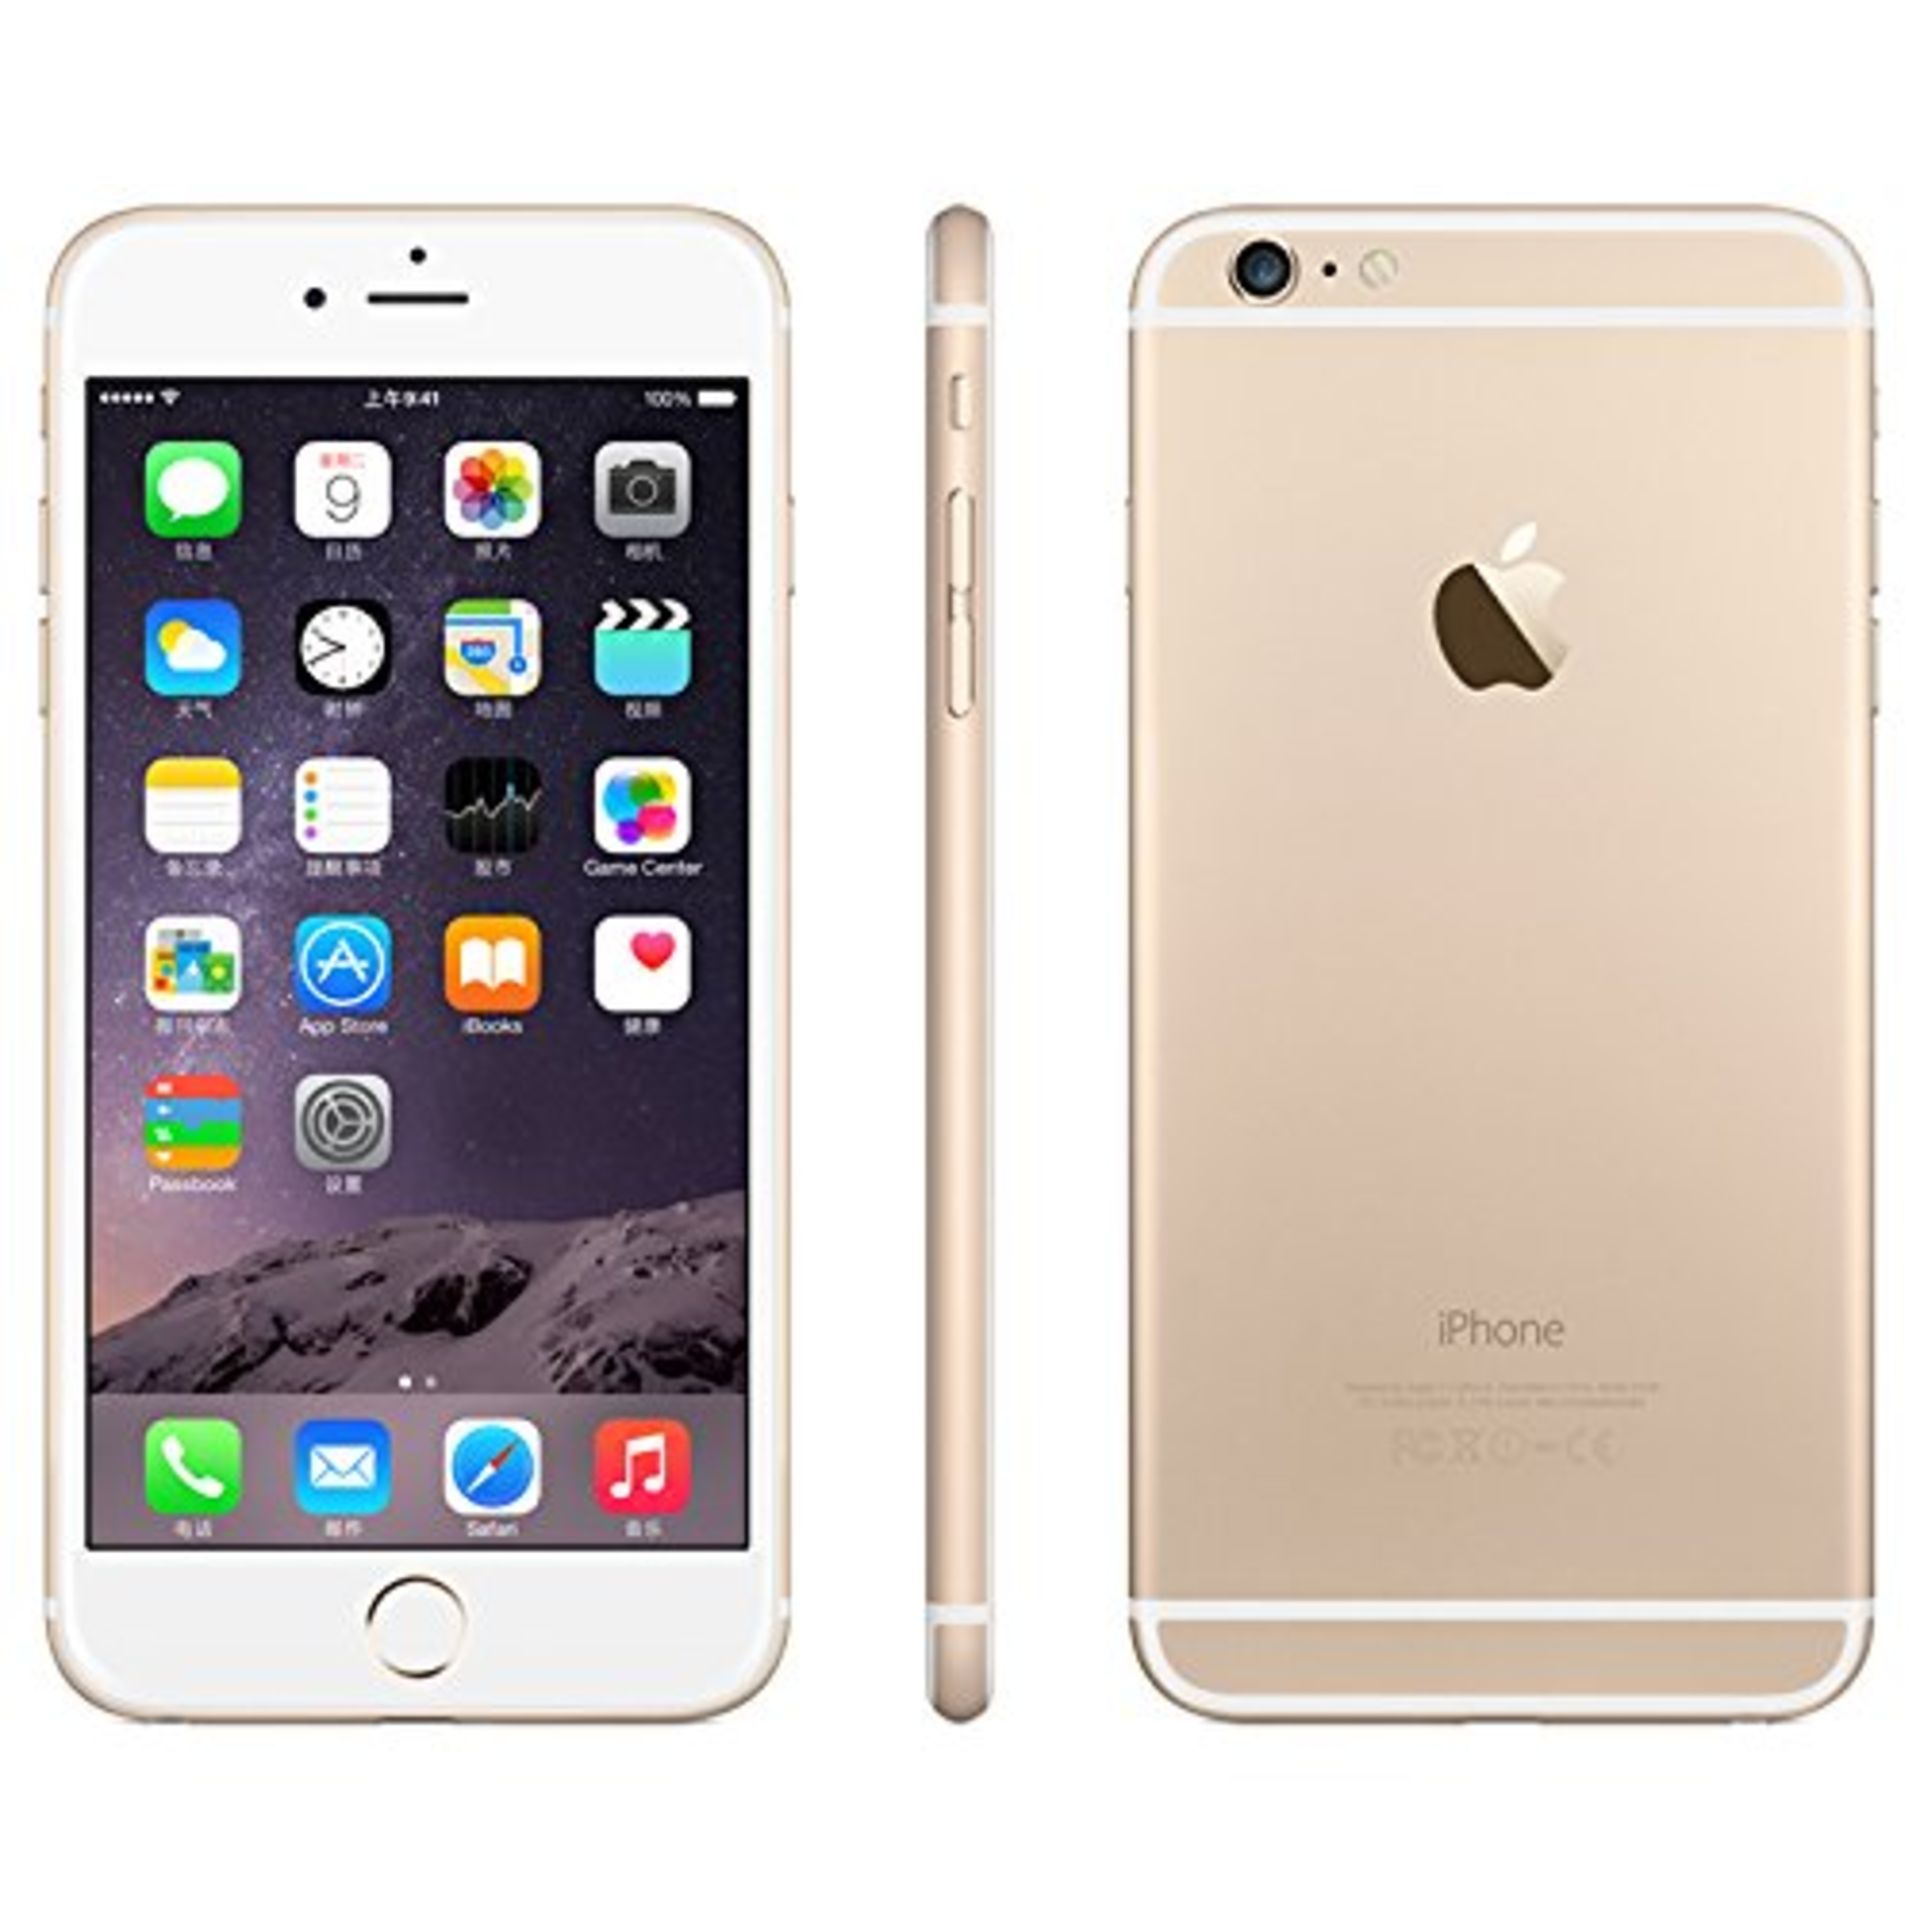 Grade A Apple iphone 6 plus 128GB Colours May Vary Touch ID Item available approx 15 working days